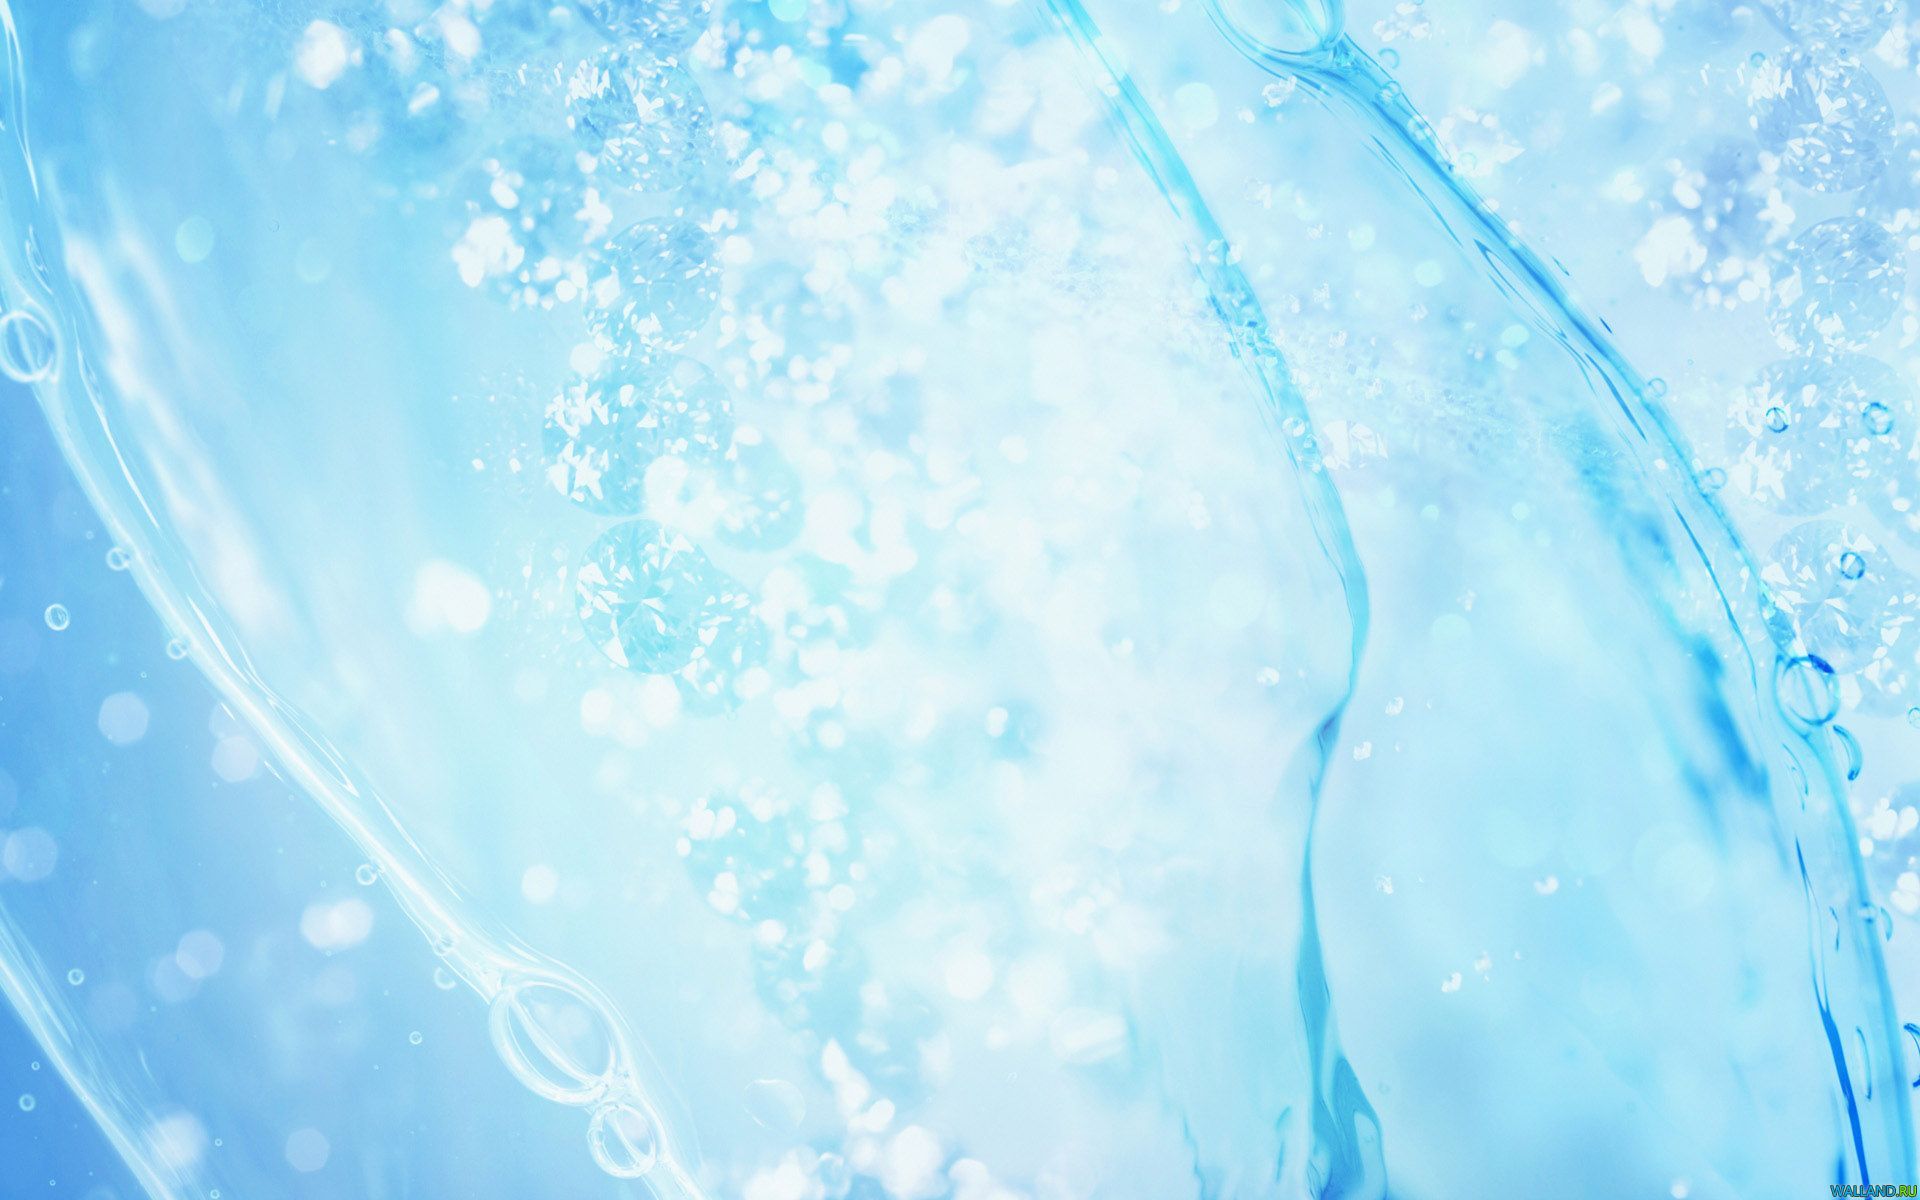 Light blue water droplets Samsung Galaxy Note 3 Wallpapers